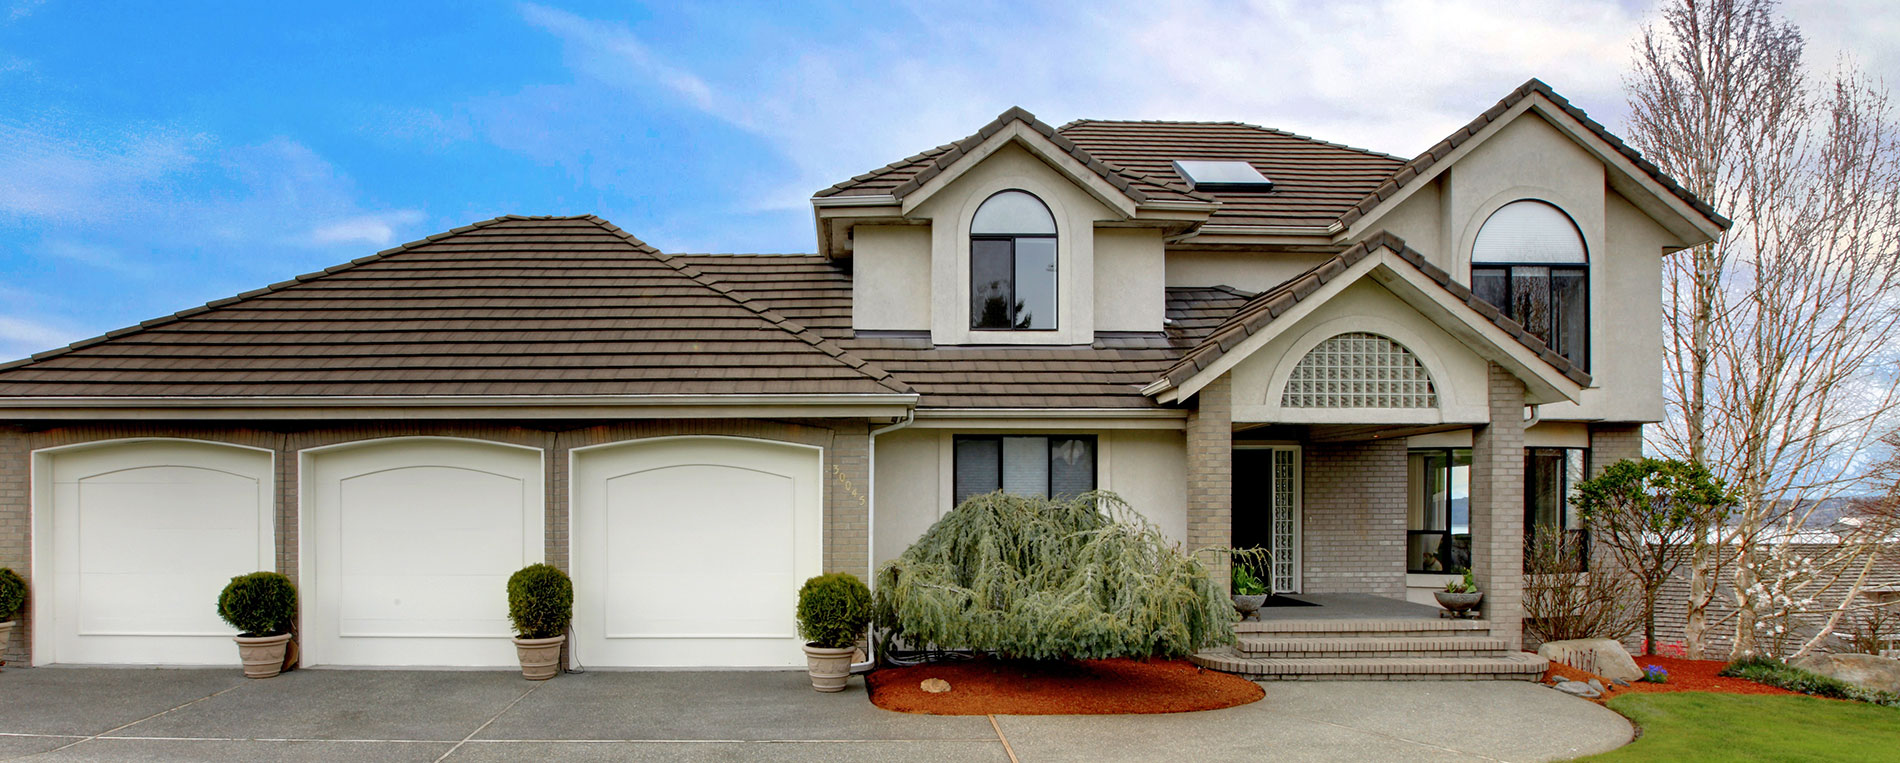 Is It Finally Time To Upgrade Your Manual Garage Door?